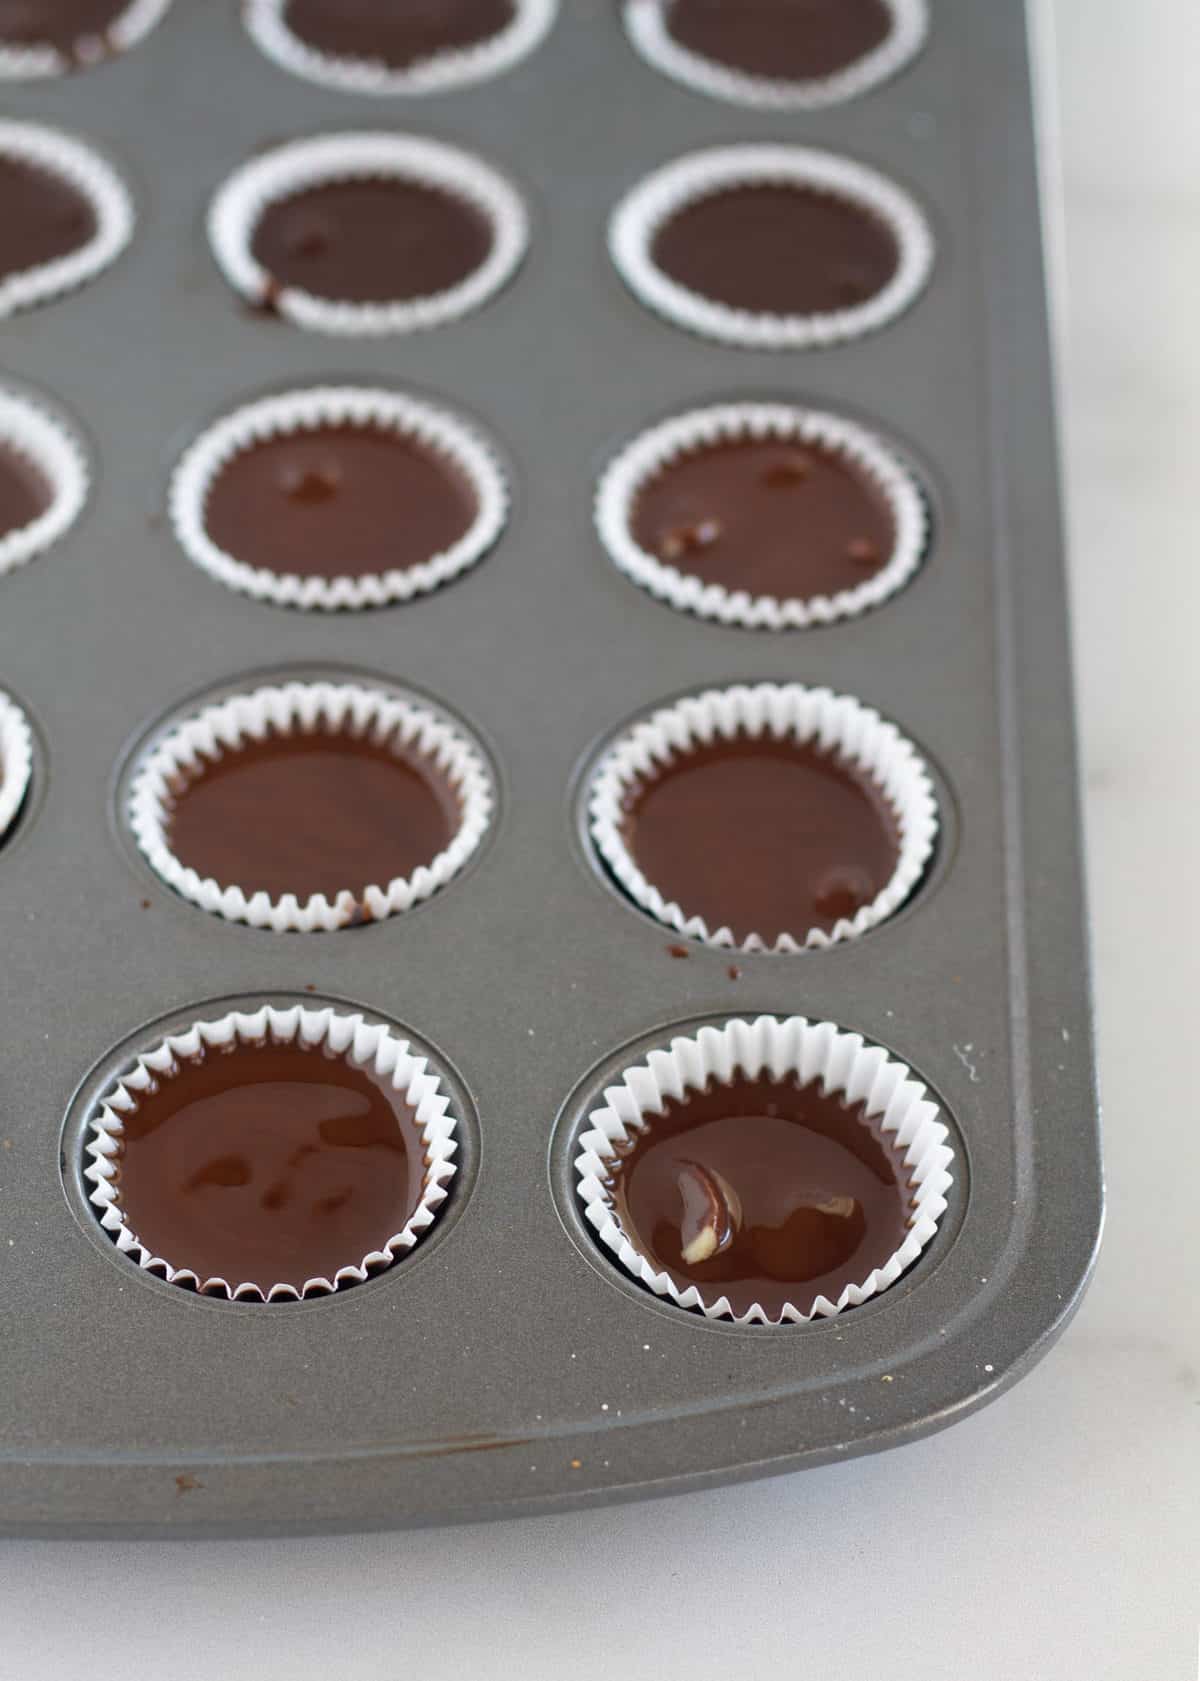 melted chocolate drizzled over macadamia nuts in mini muffin tin